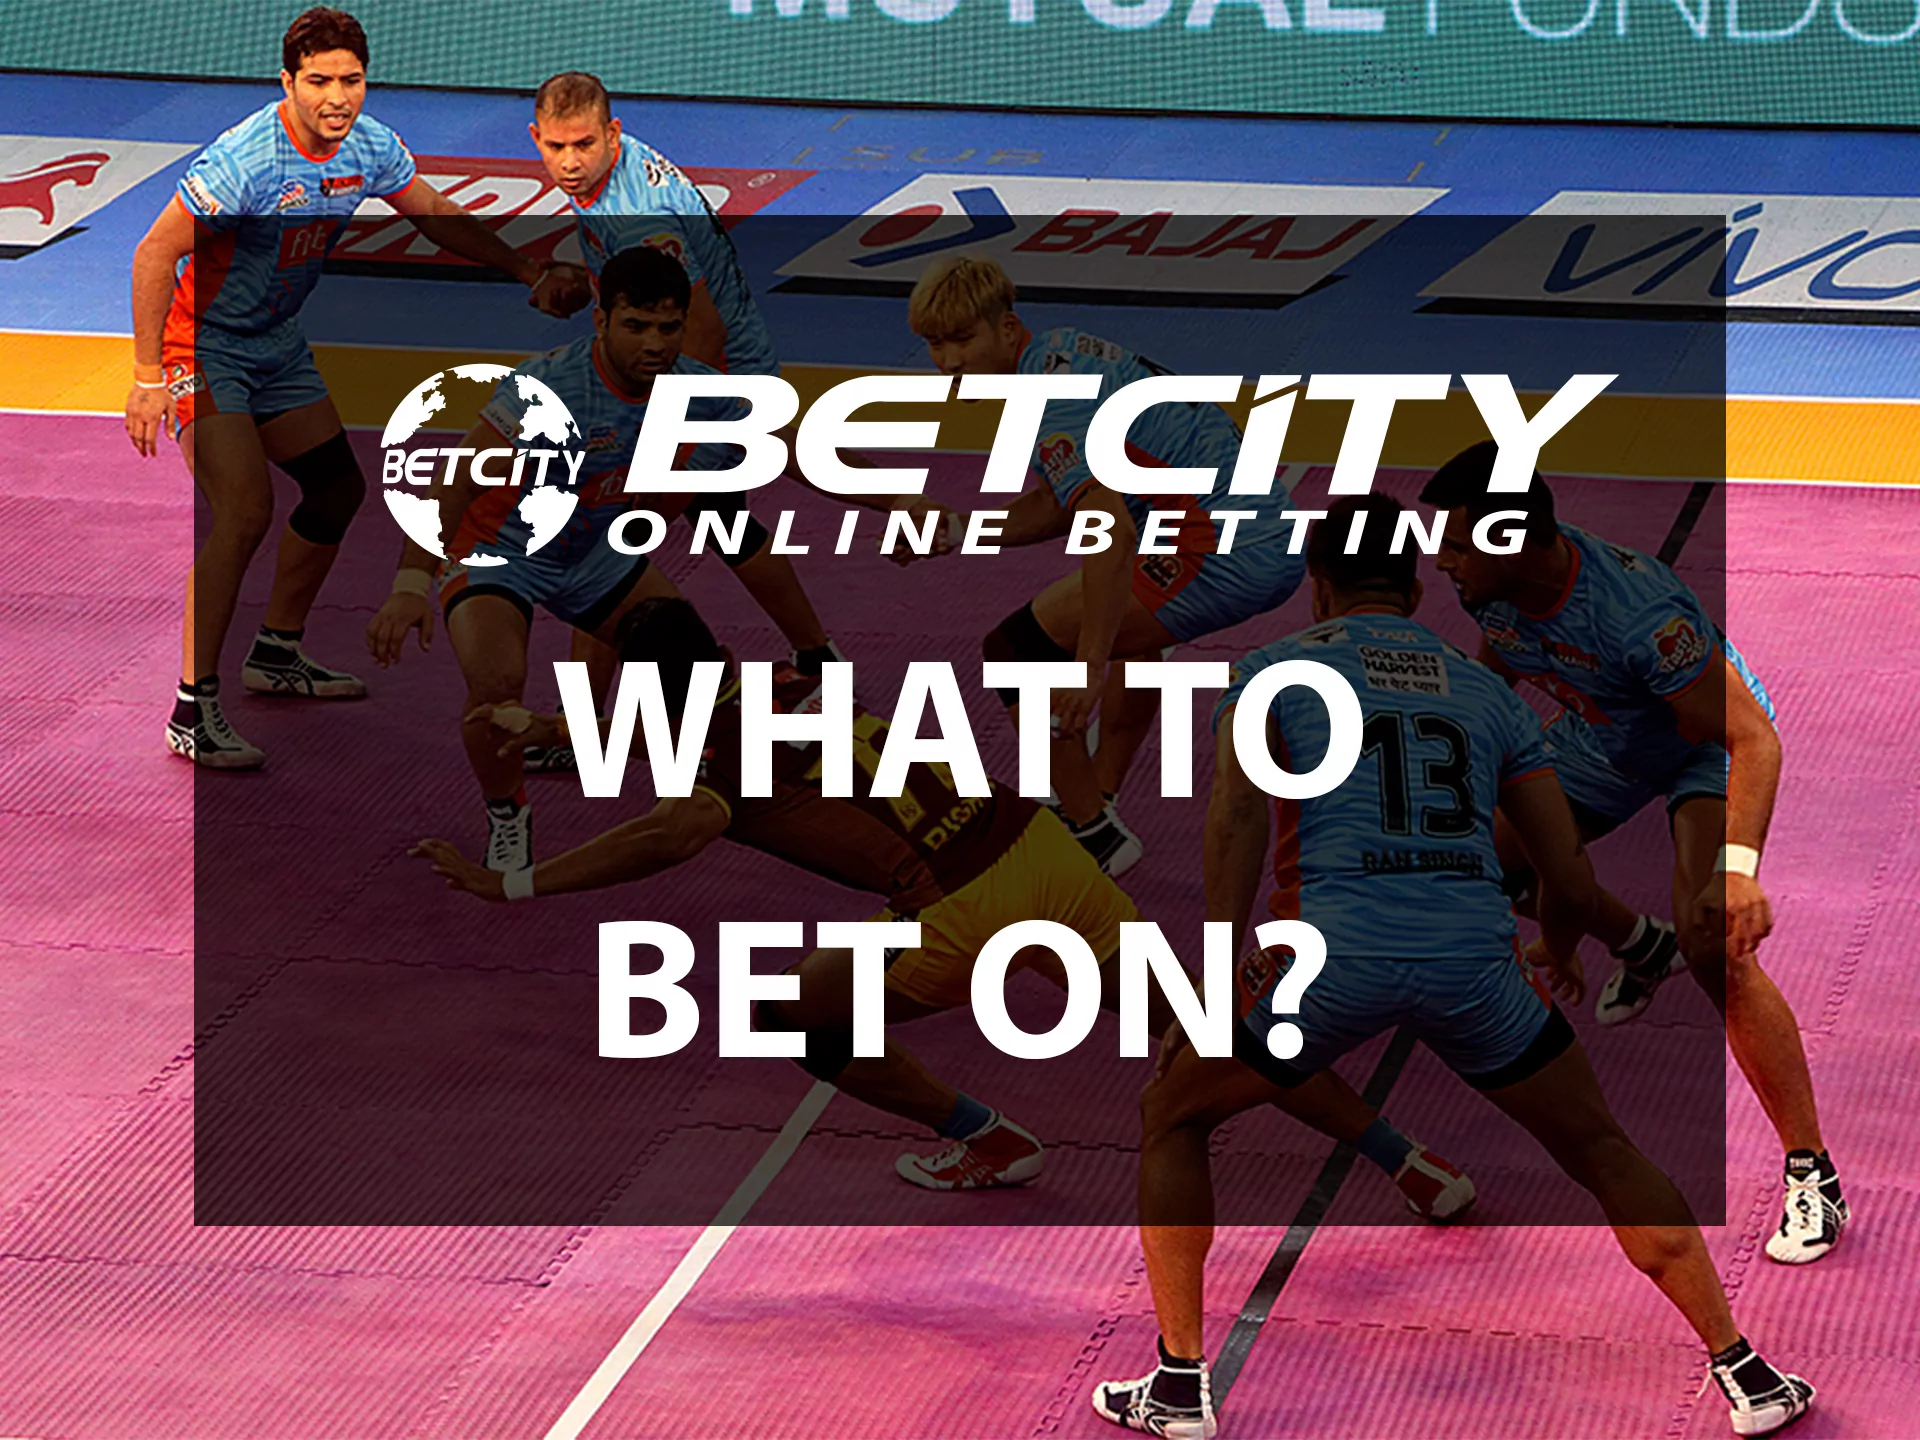 You can bet on kabaddi teams from different countries at Betcity.